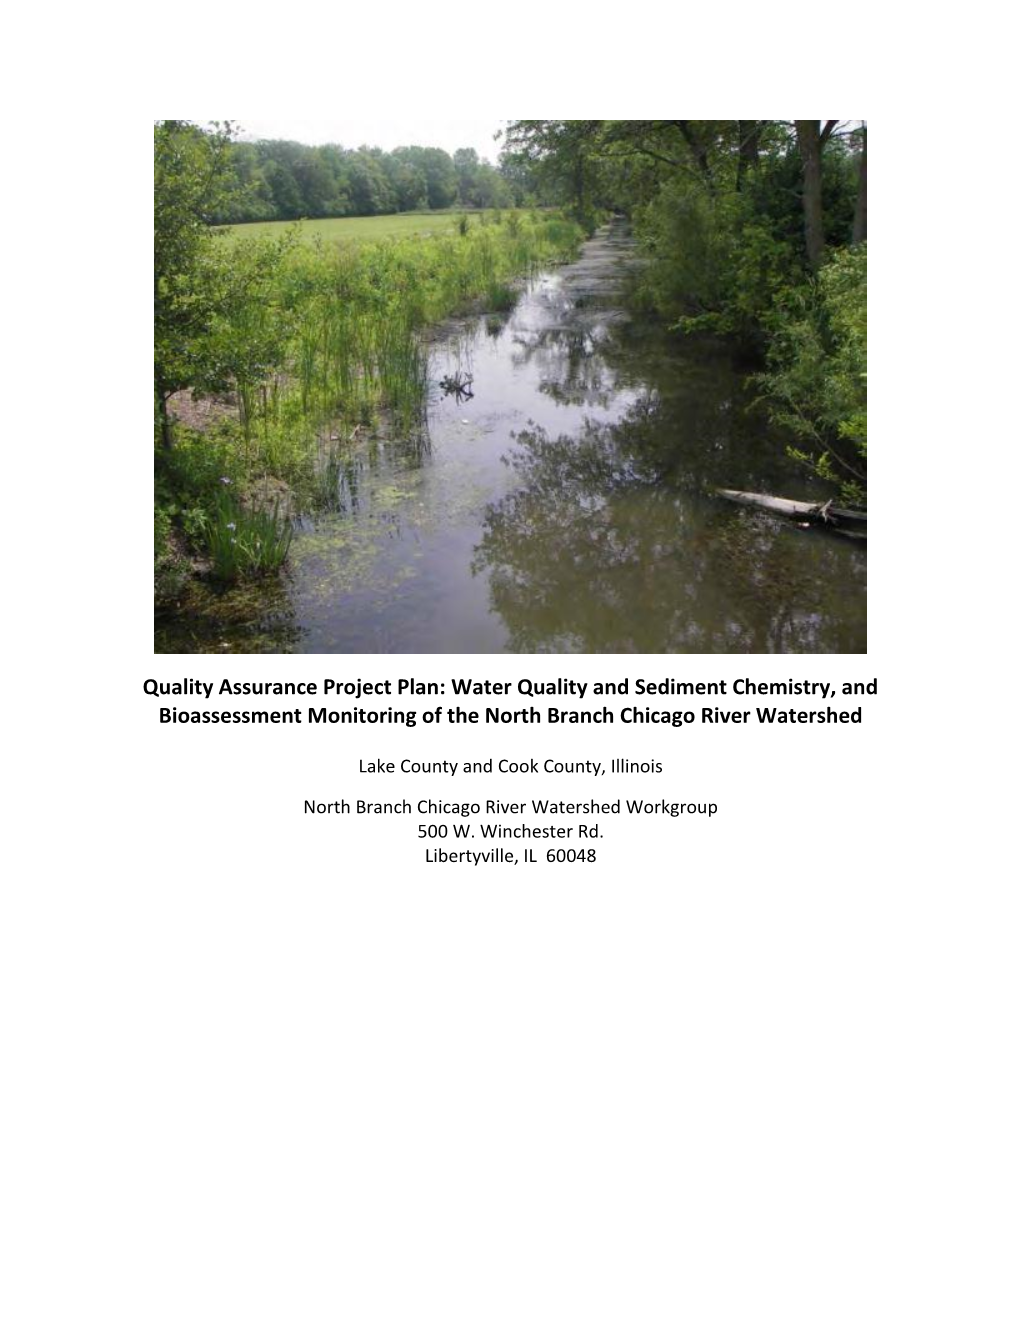 Quality Assurance Project Plan: Water Quality and Sediment Chemistry, and Bioassessment Monitoring of the North Branch Chicago River Watershed